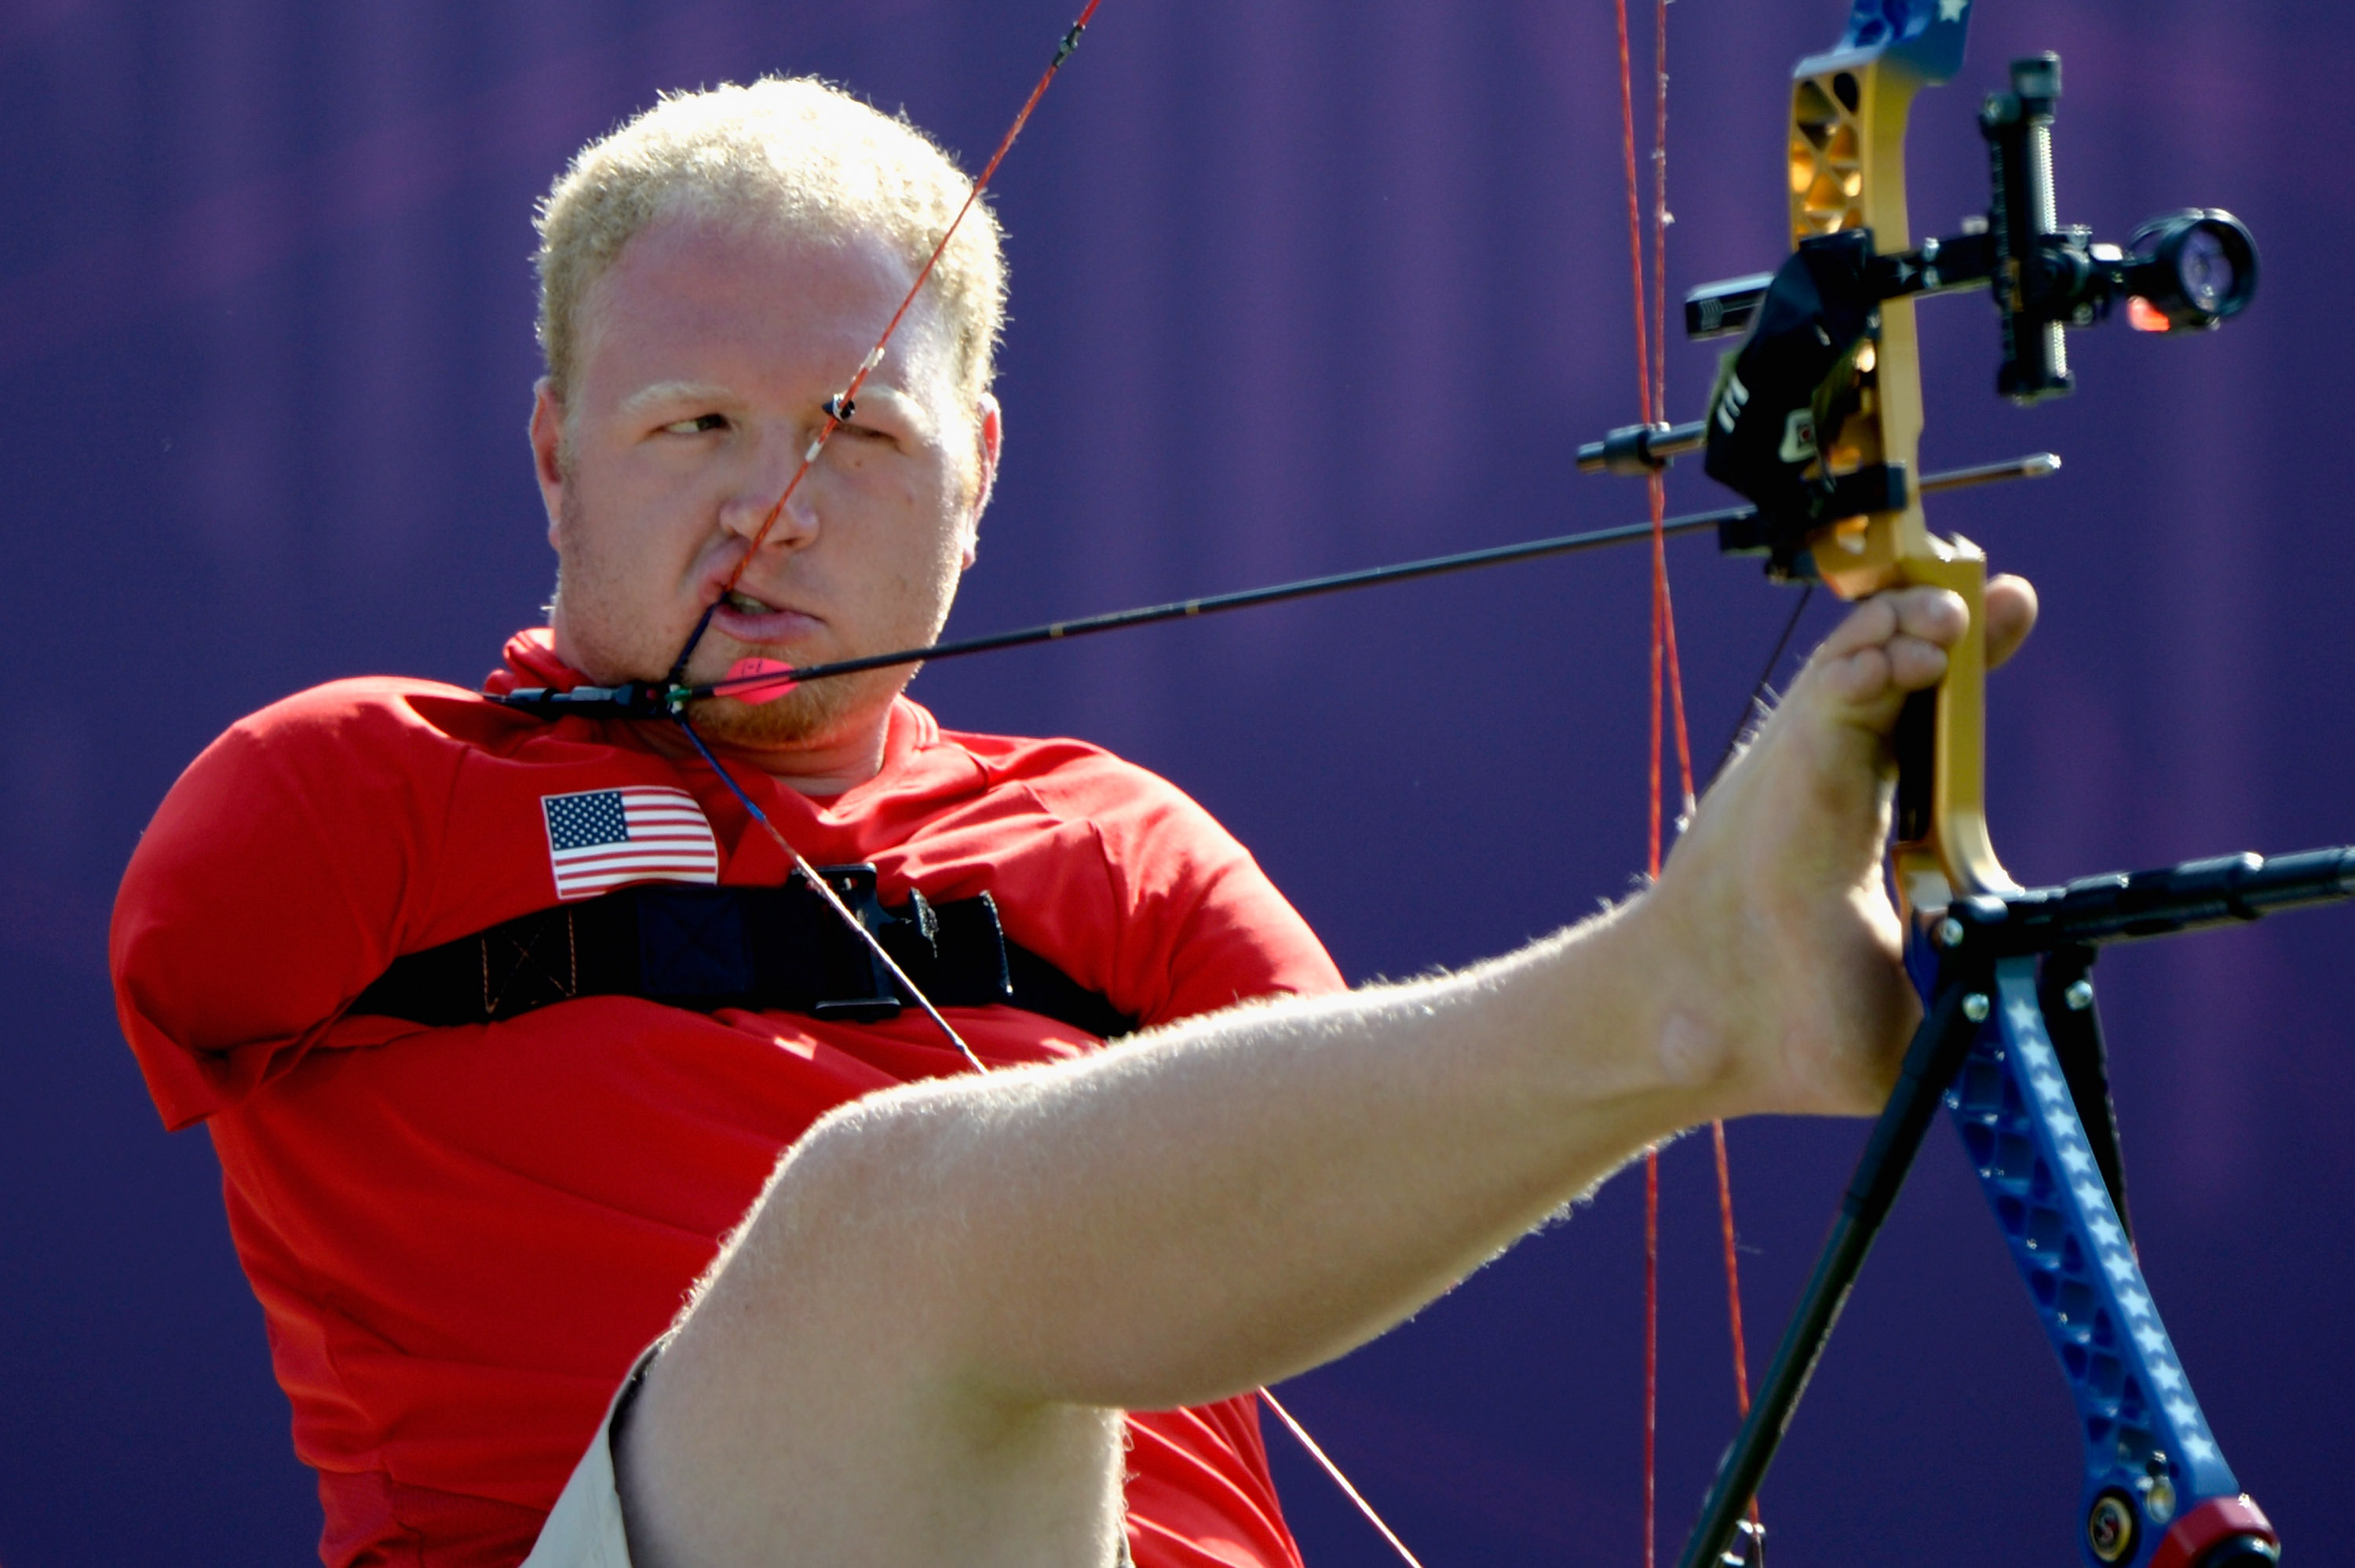 Matt Stutzman : The Armless Archer who is aiming for the stars